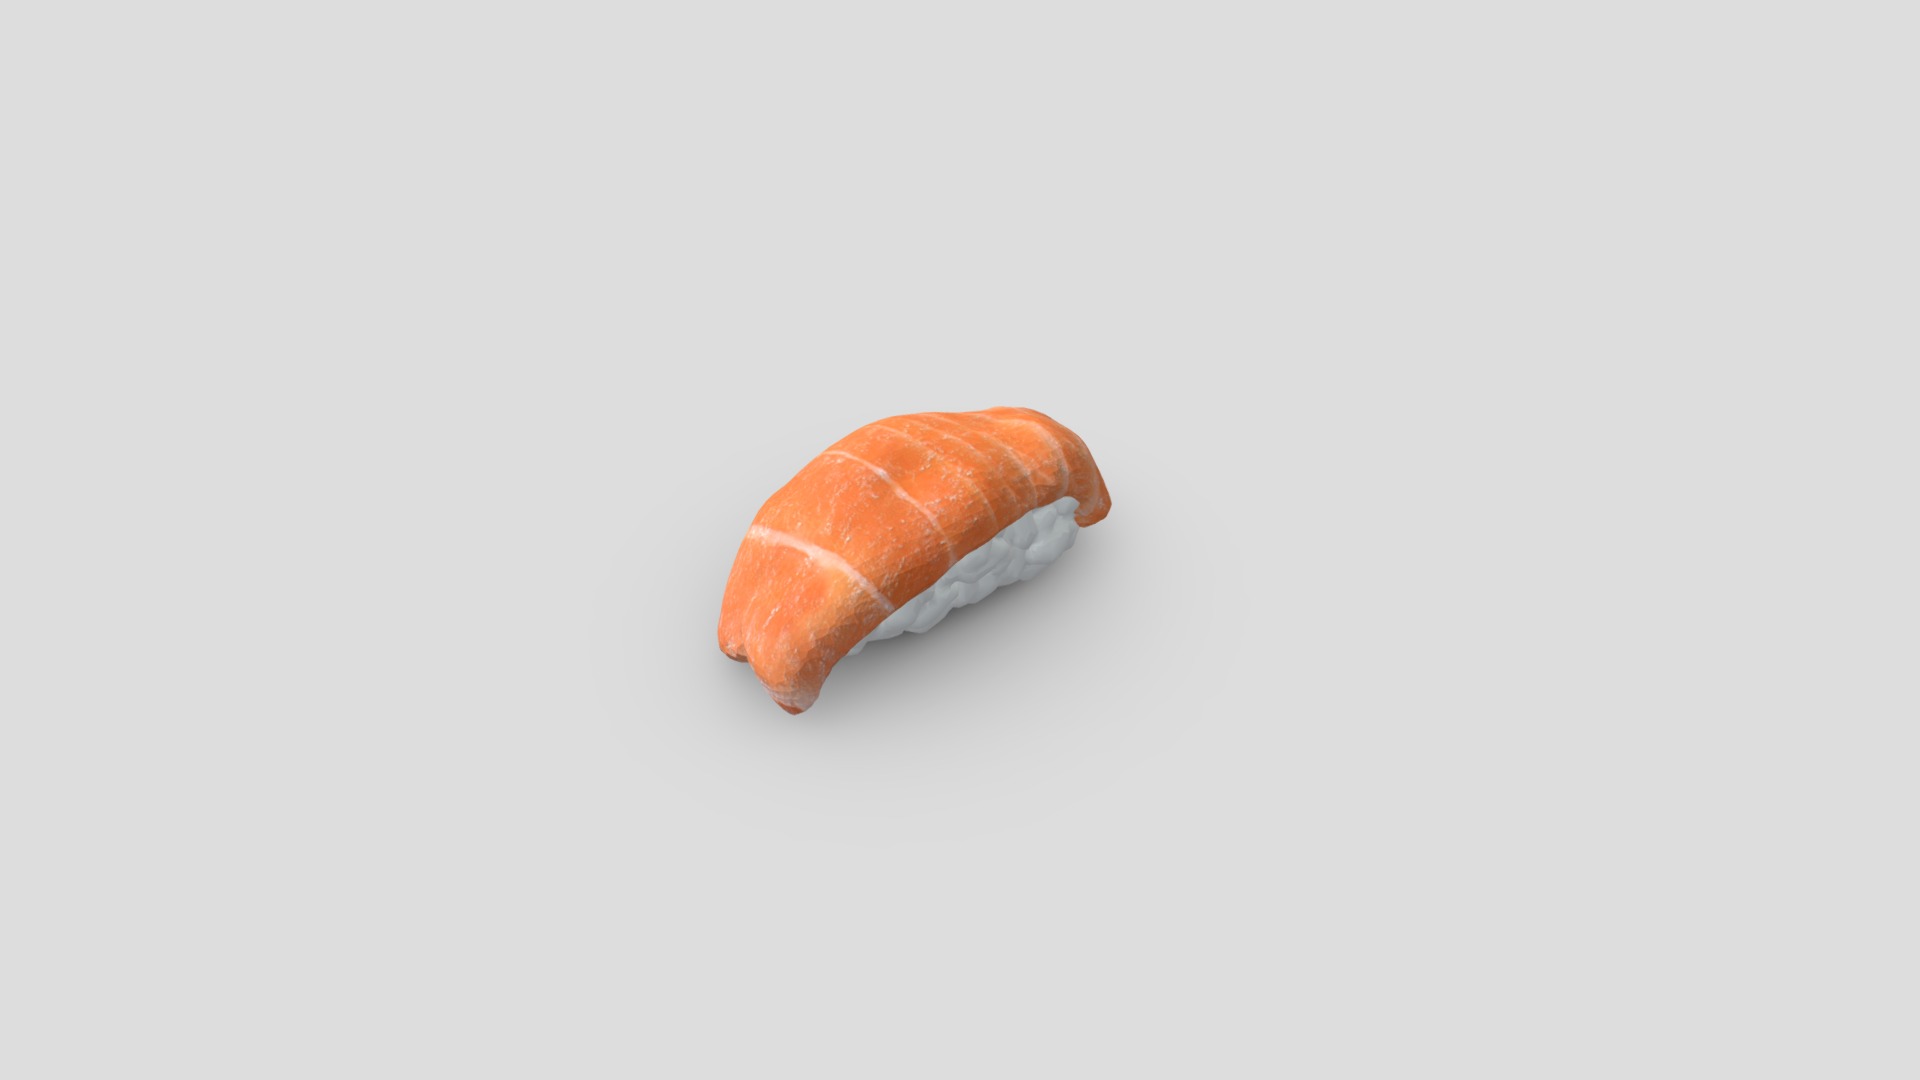 3D model Sushi – Salmon Nigiri Sushi Roll - This is a 3D model of the Sushi - Salmon Nigiri Sushi Roll. The 3D model is about a close up of a carrot.